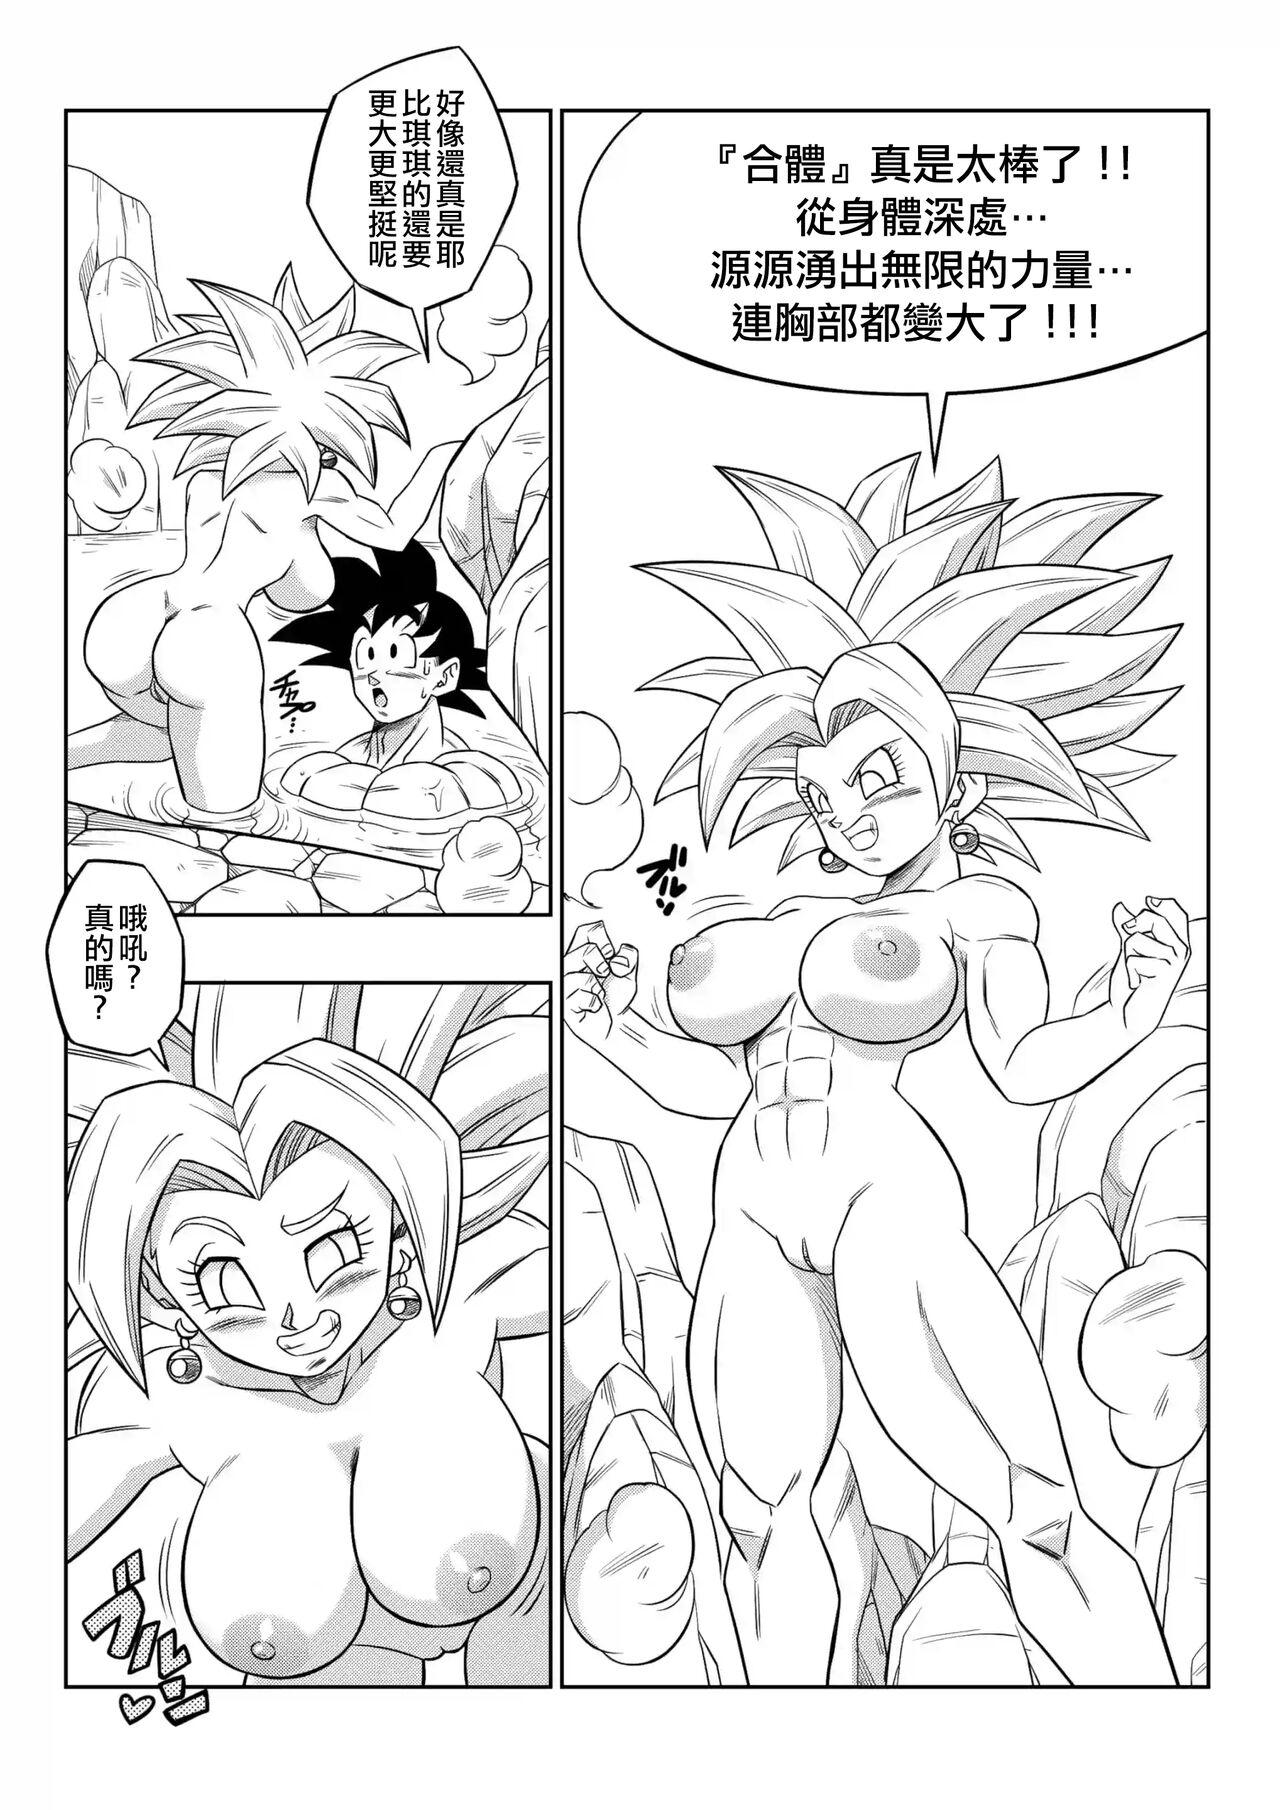 Wet Pussy Fight in the 6th Universe!!! - Dragon ball super Mas - Page 10